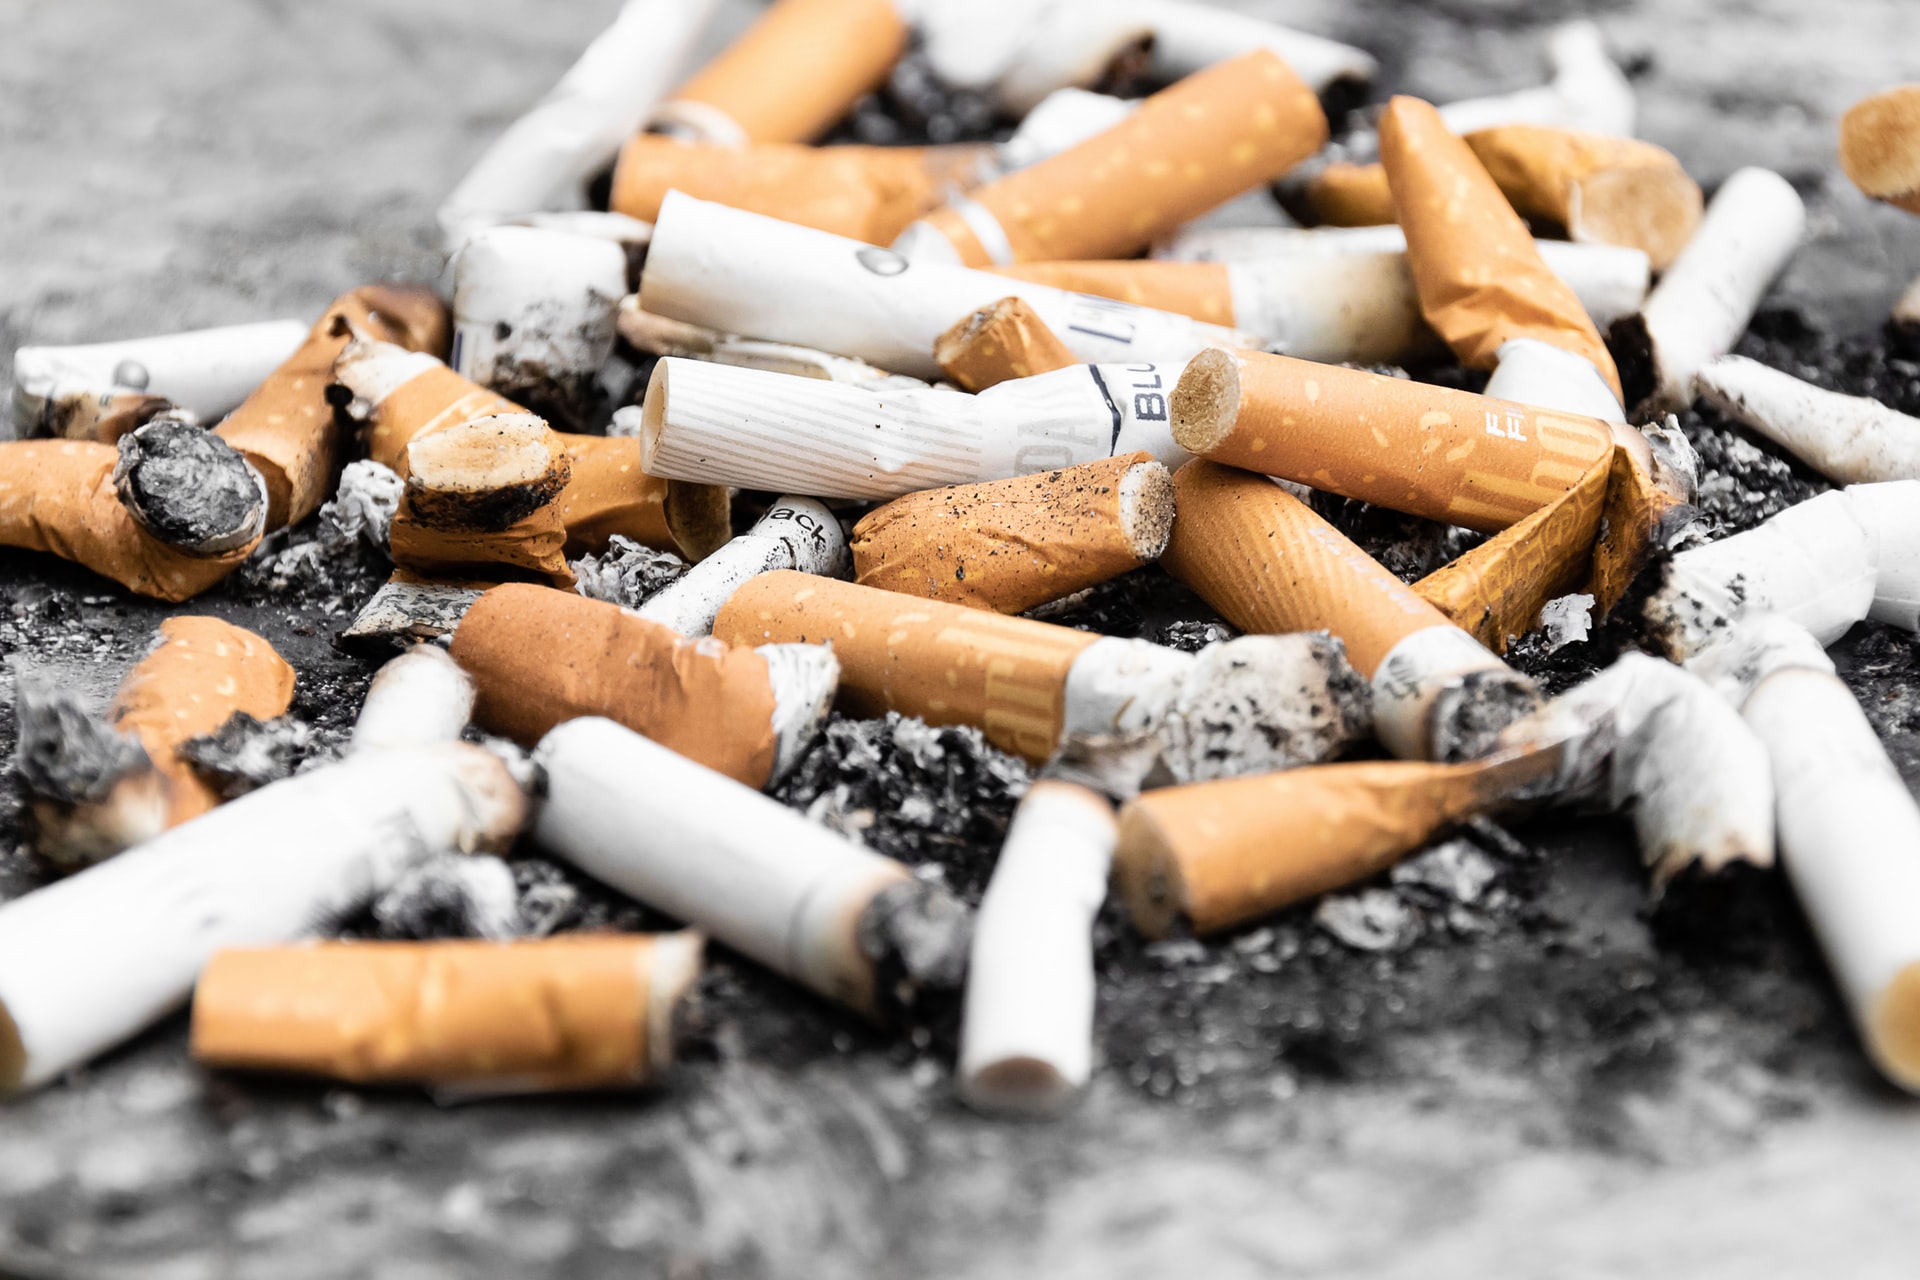 Ex-Smokers Gain Health Benefits Despite Added Pounds